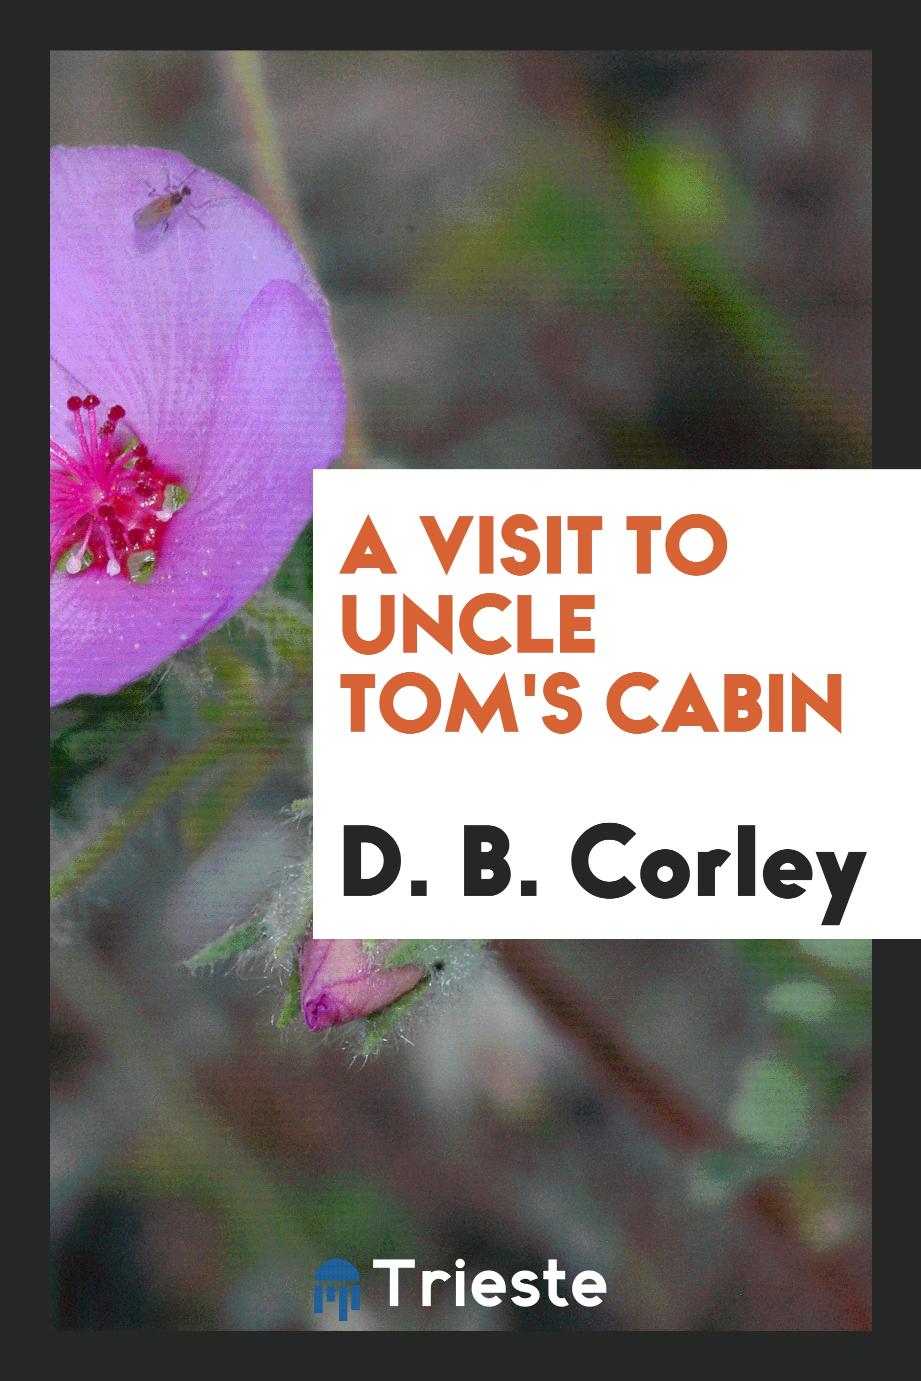 A Visit to Uncle Tom's Cabin